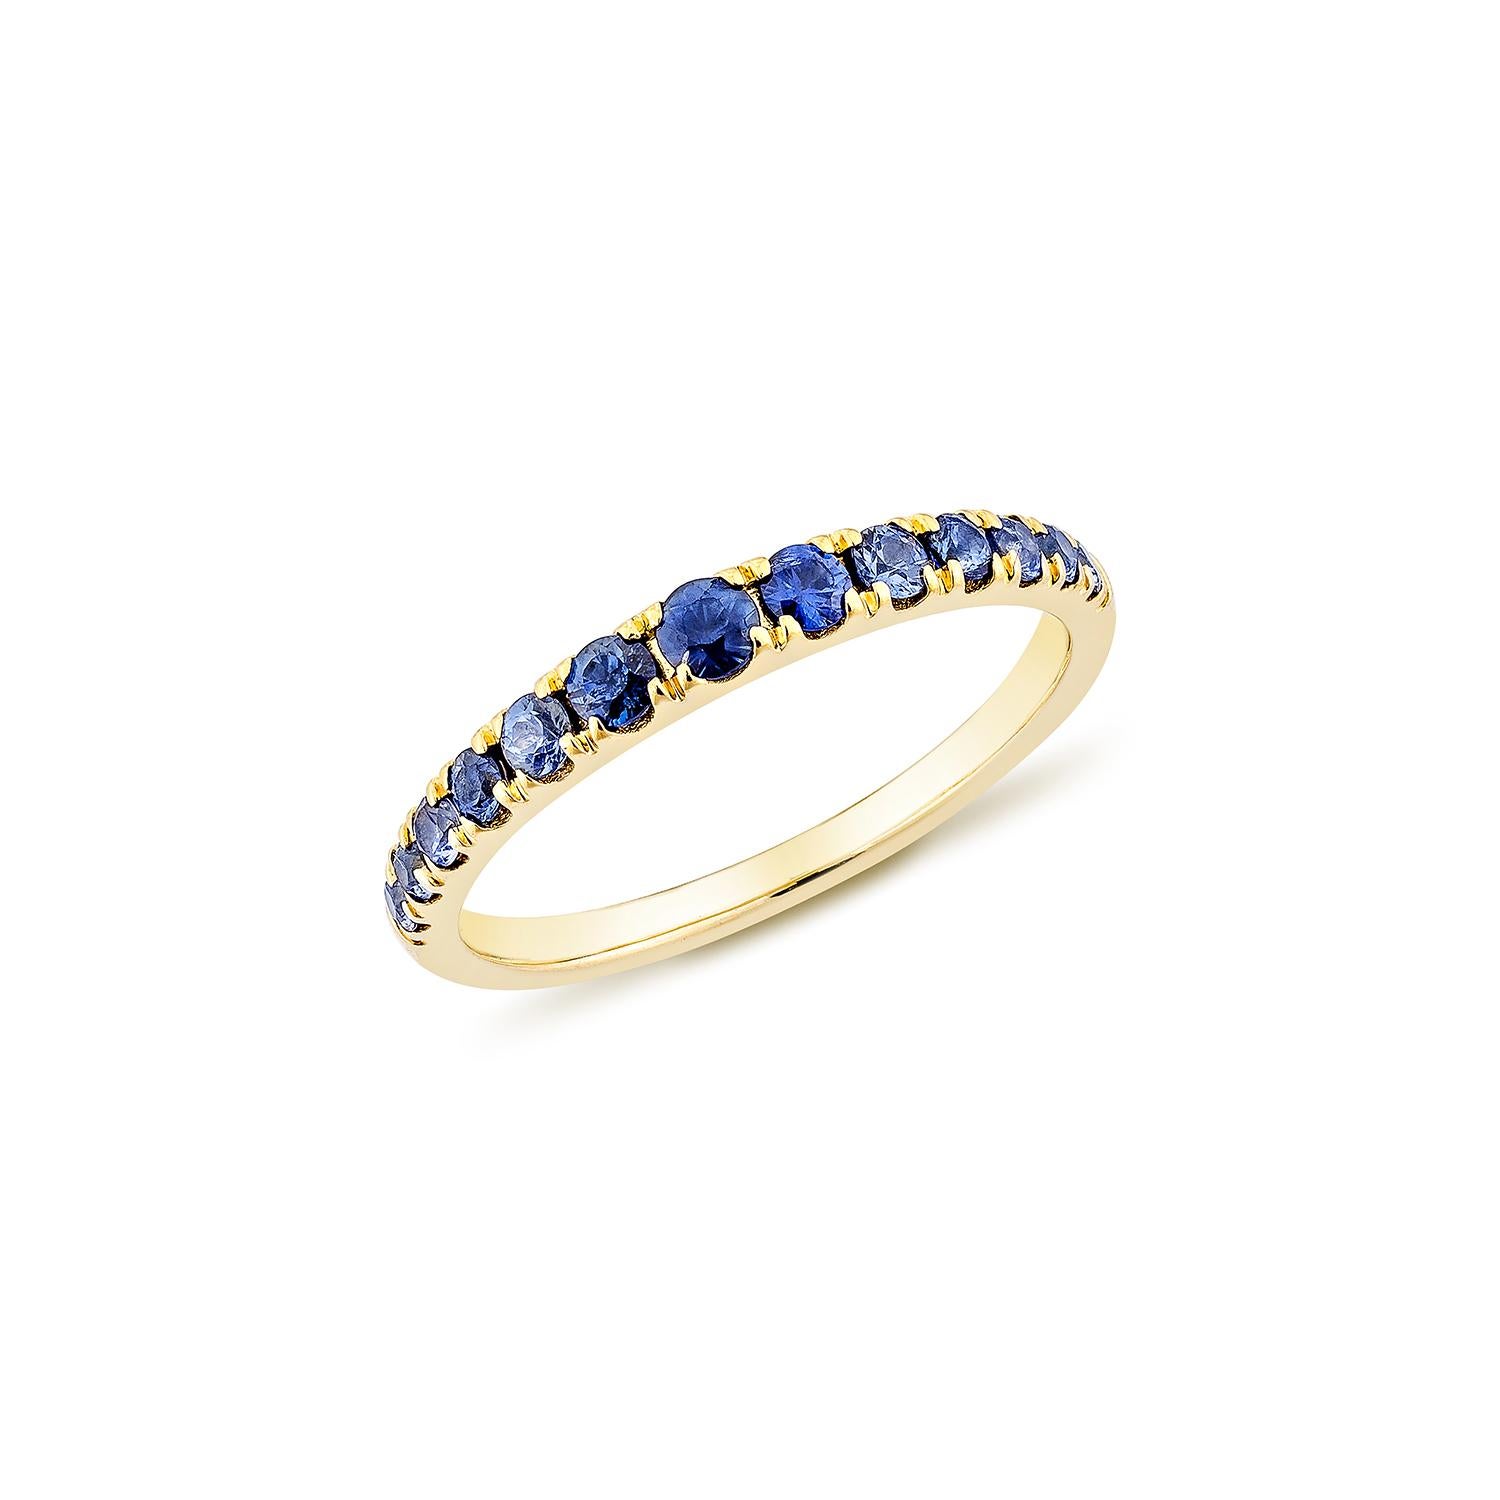 Contemporary 0.64 Carat Blue Sapphire Stackable Ring in 14Karat Yellow Gold.   For Sale